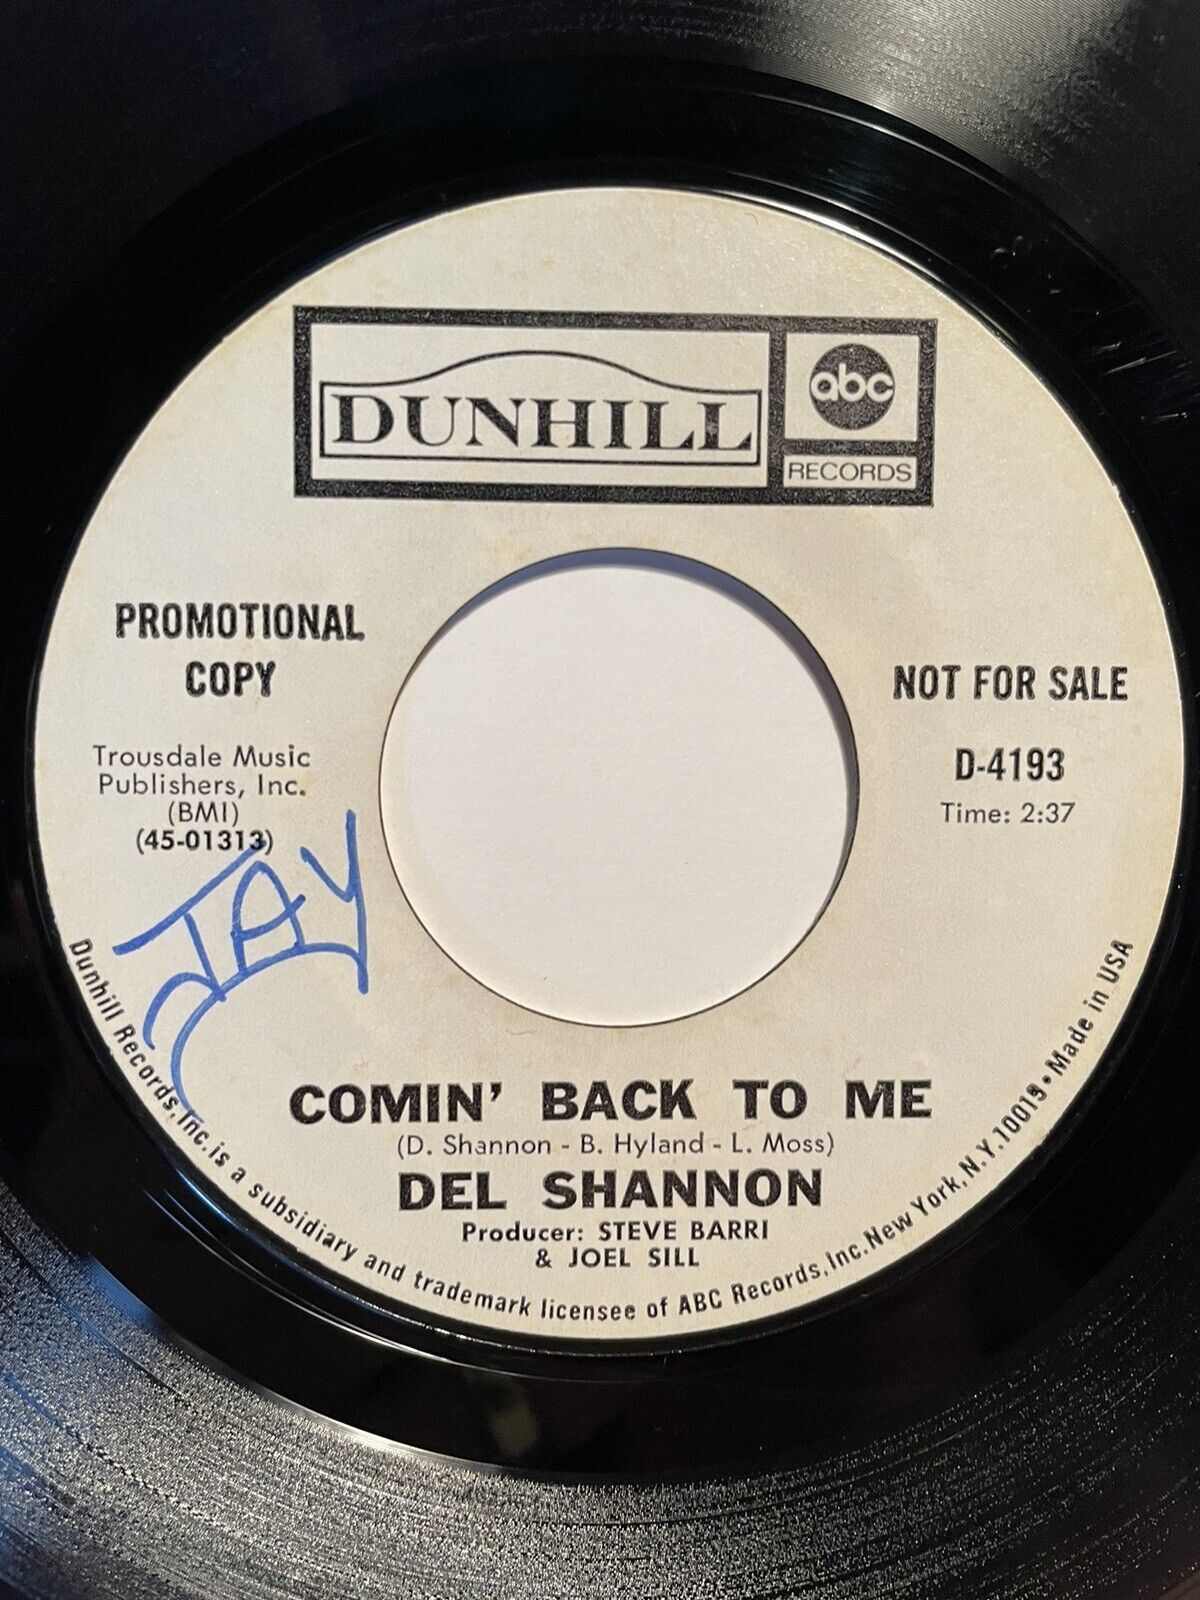 Del Shannon “Comin’ Back To Me” Dunhill 7” 45 Strong VG+